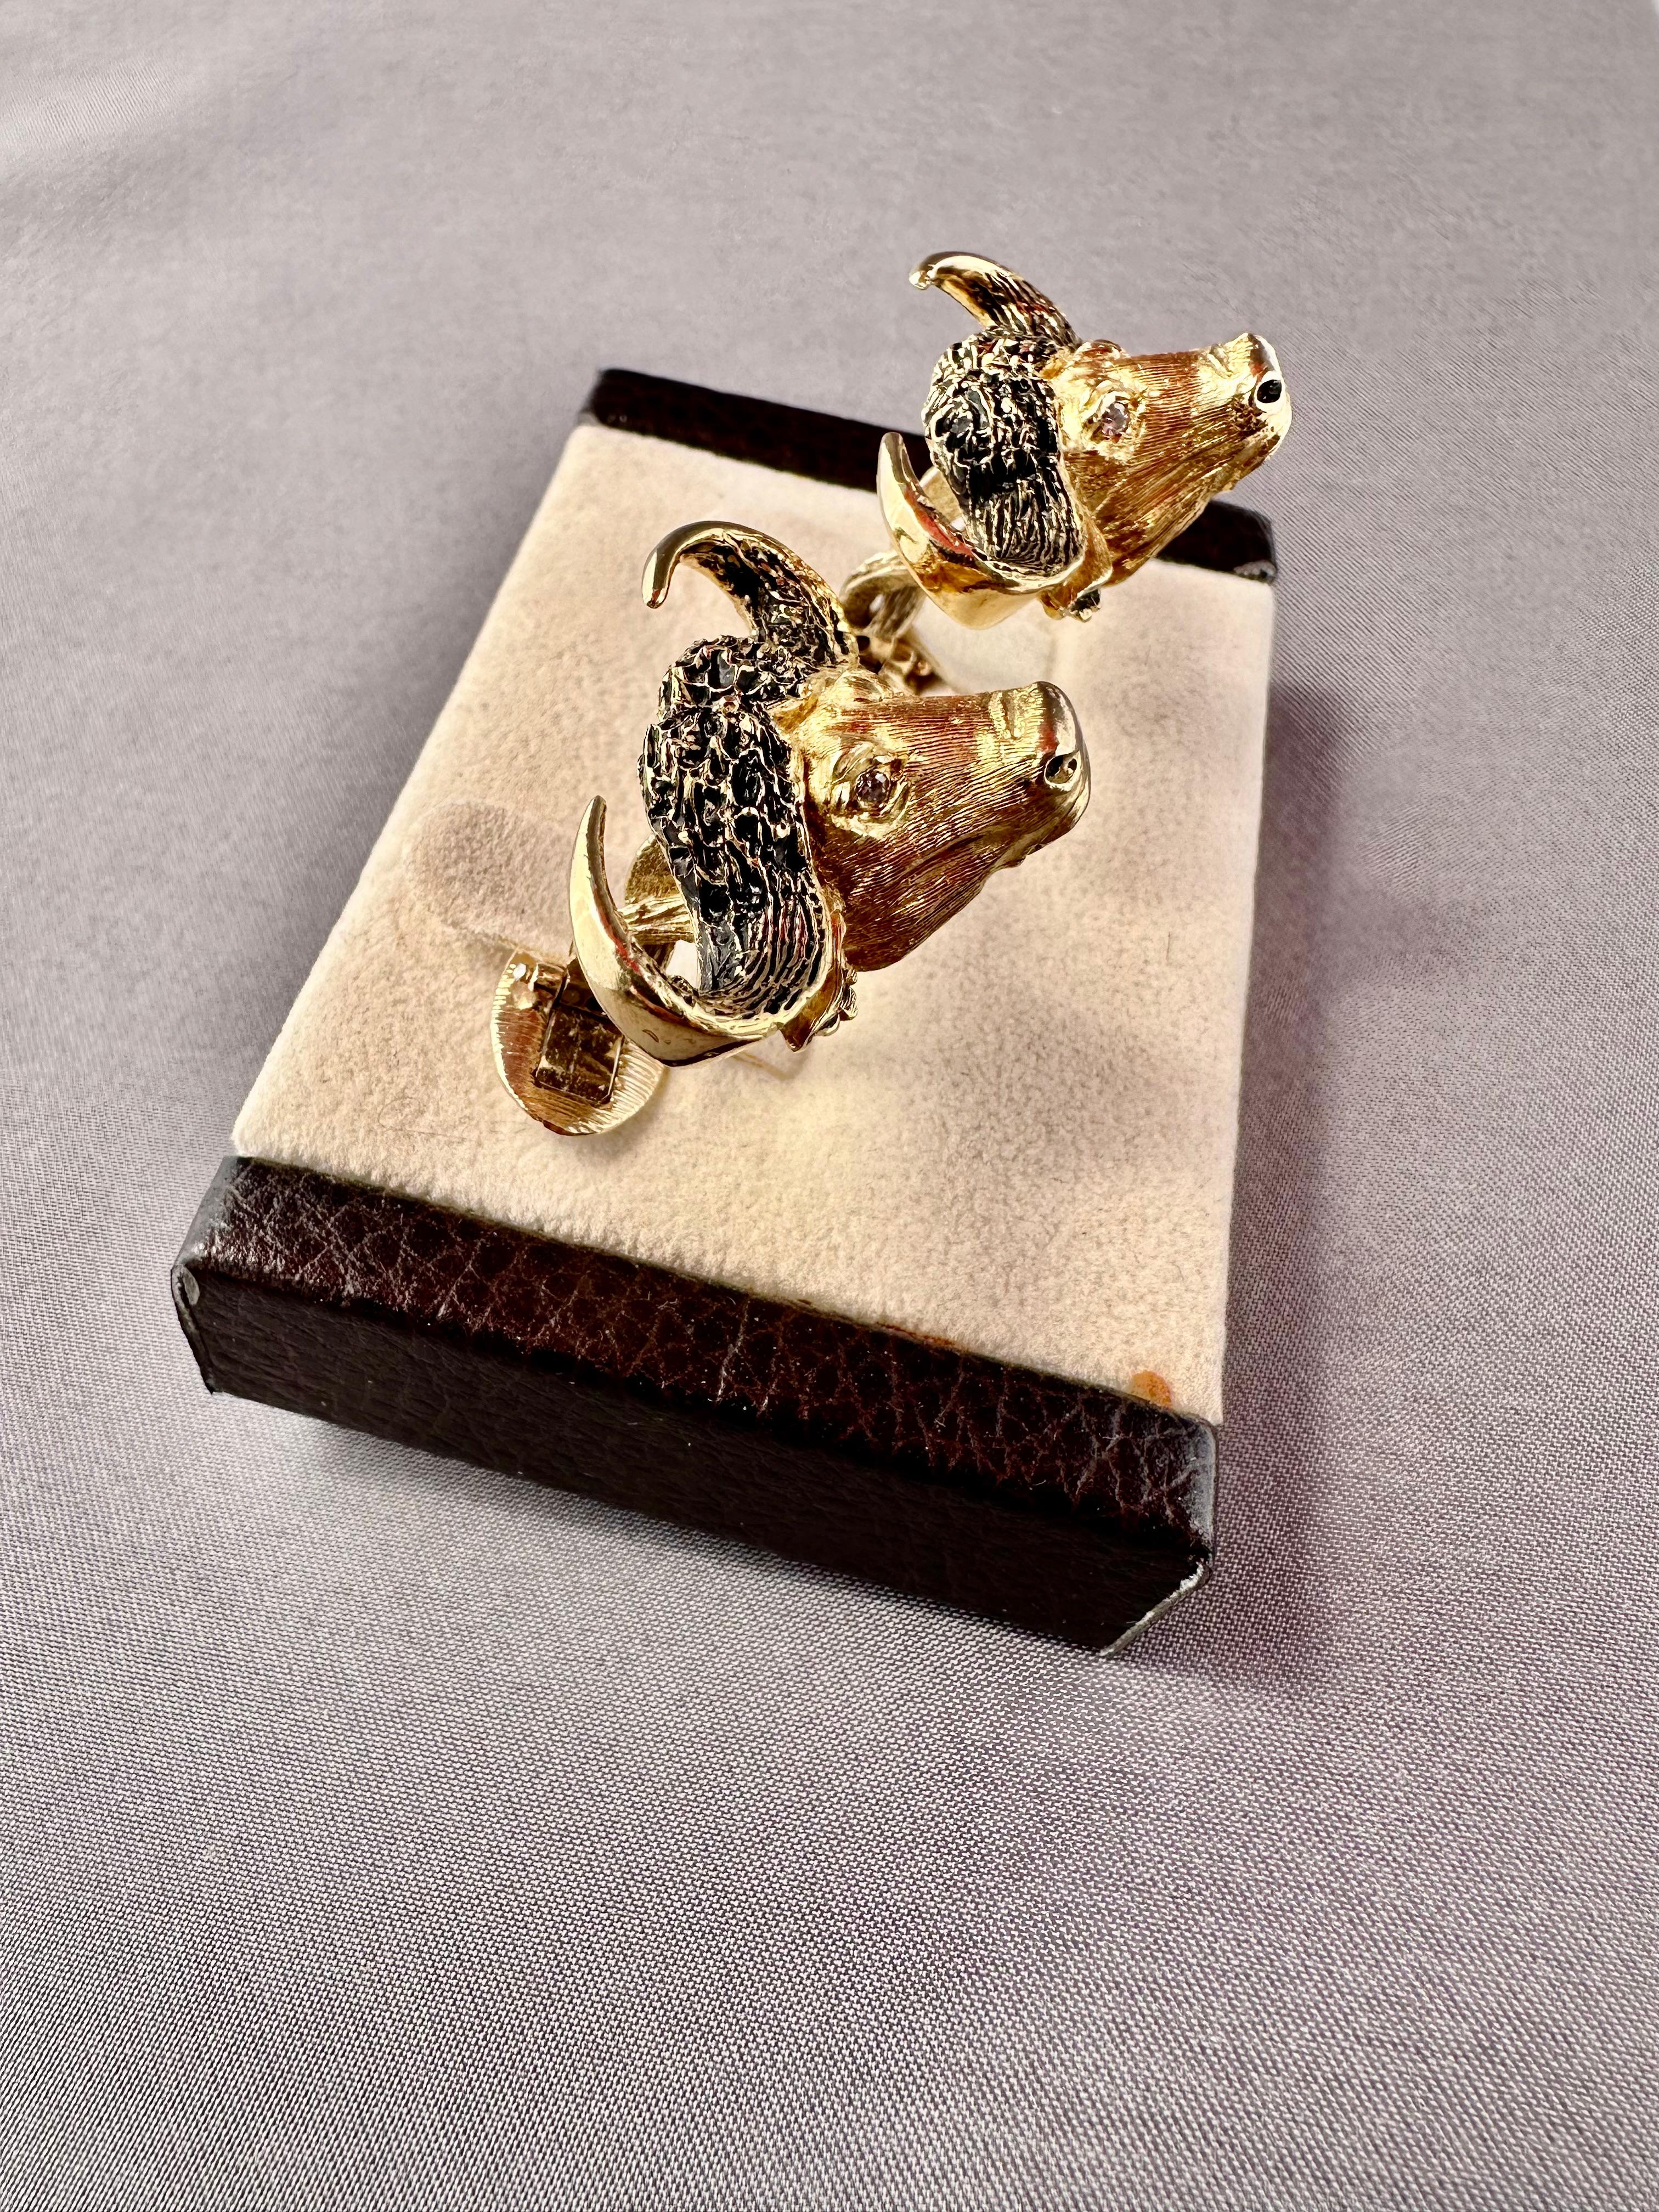 Men's Custom Made 18k Gold & Diamond African Water Buffalo Cufflinks


Description / Condition: New.  All jewelry has been professionally scrutinized and cleaned prior to being offered for sale. 

Manufacturer: Custom made by 